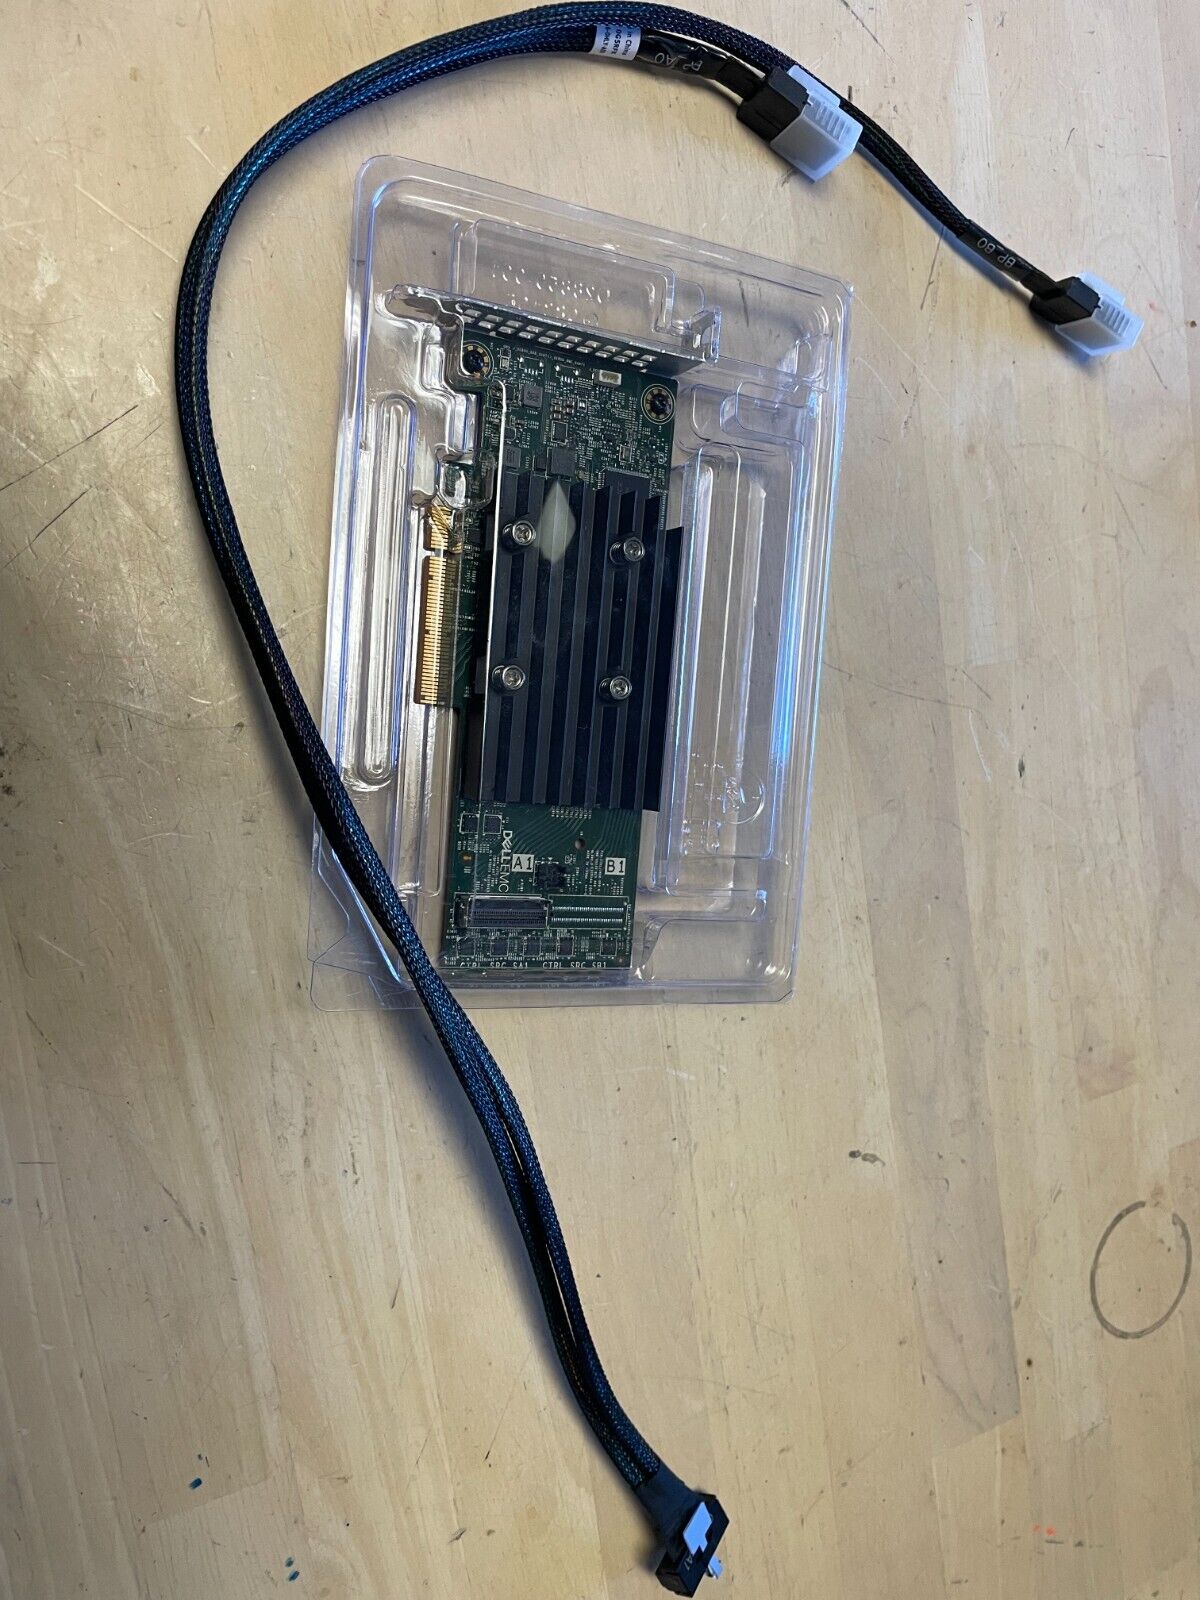 Dell PowerEdge HBA350 NFYVN PCIe 4.0 RAID Adapter Card with Cables